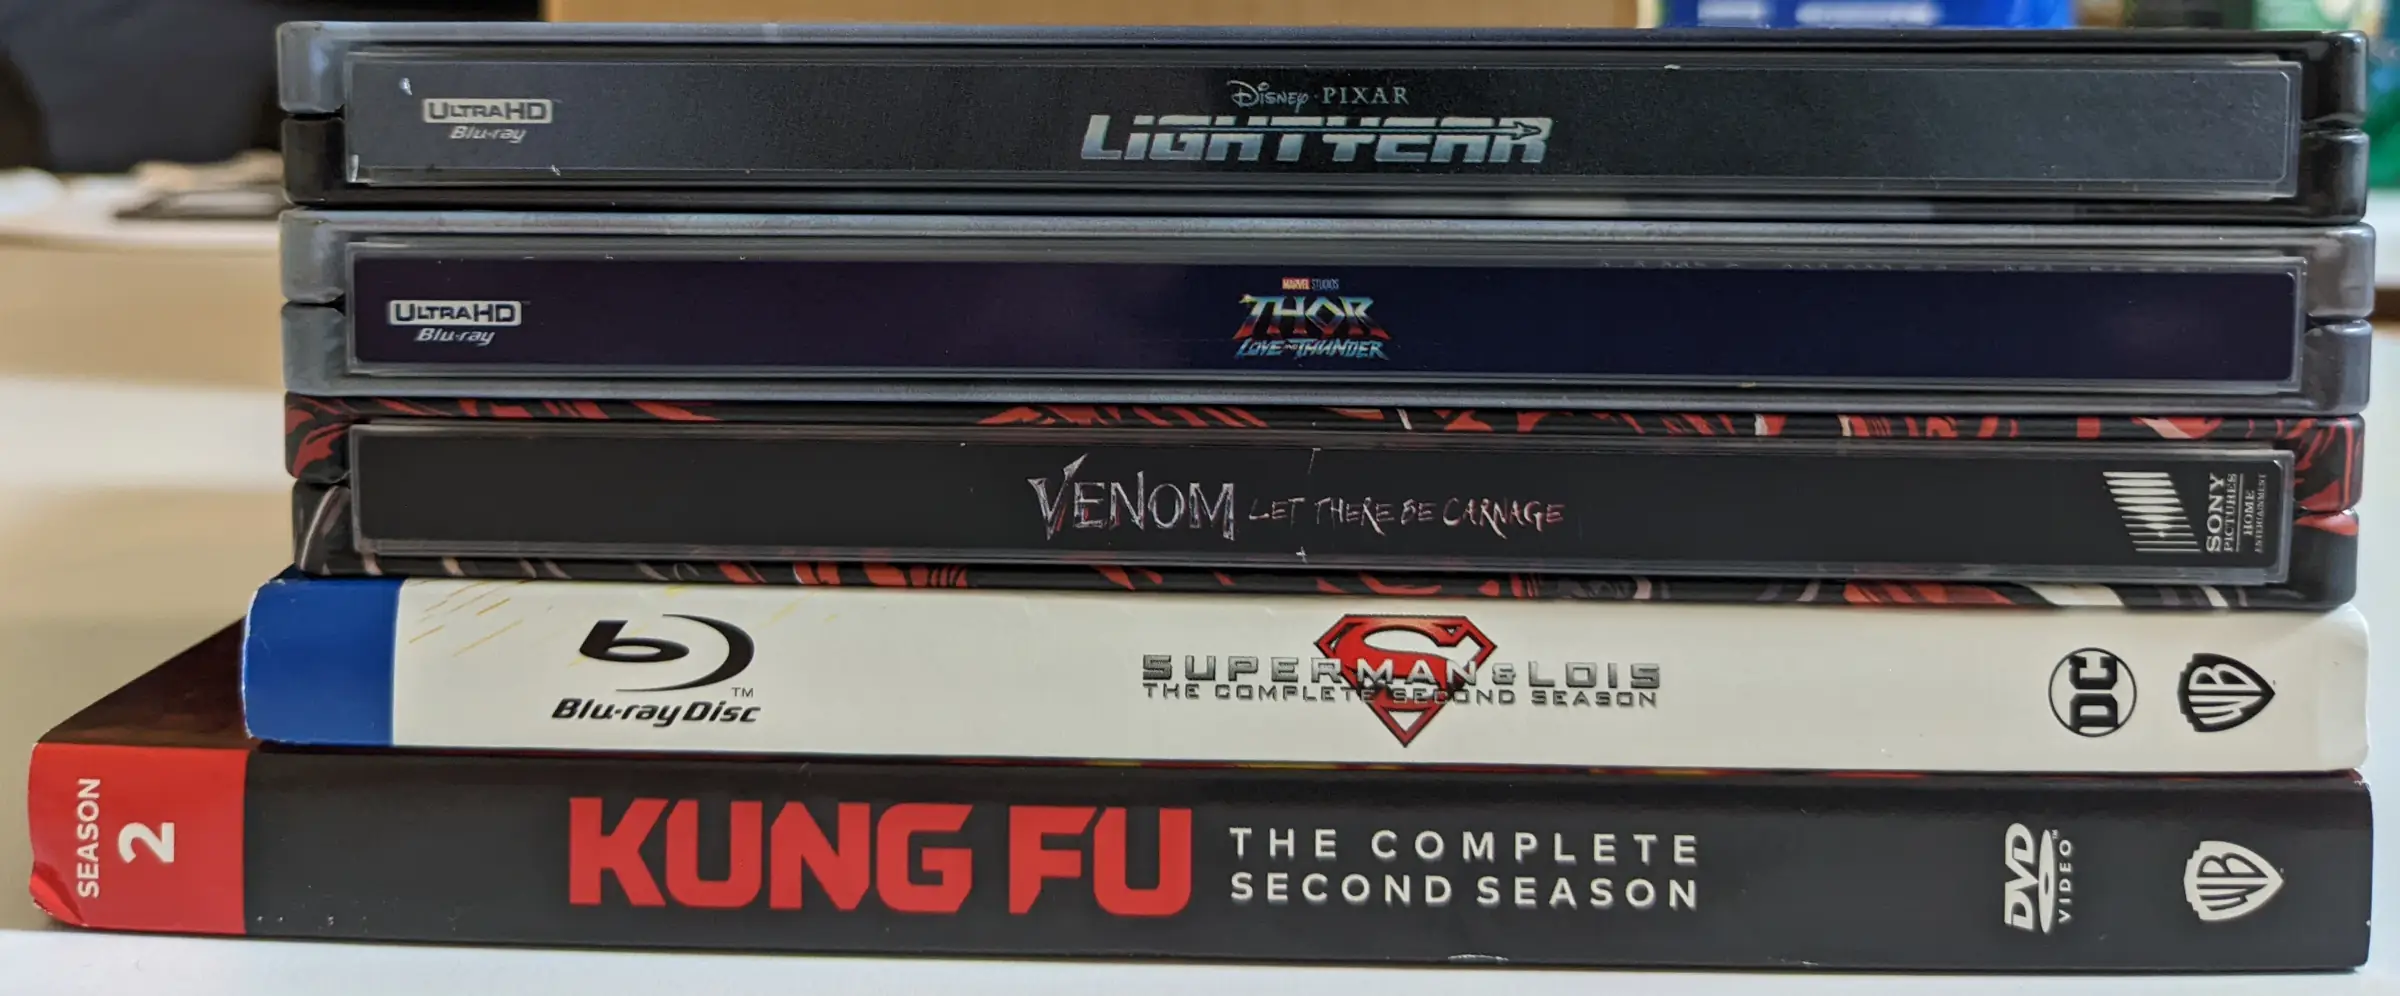 Stacked set of Blu-ray and DVD movies and television season sets.